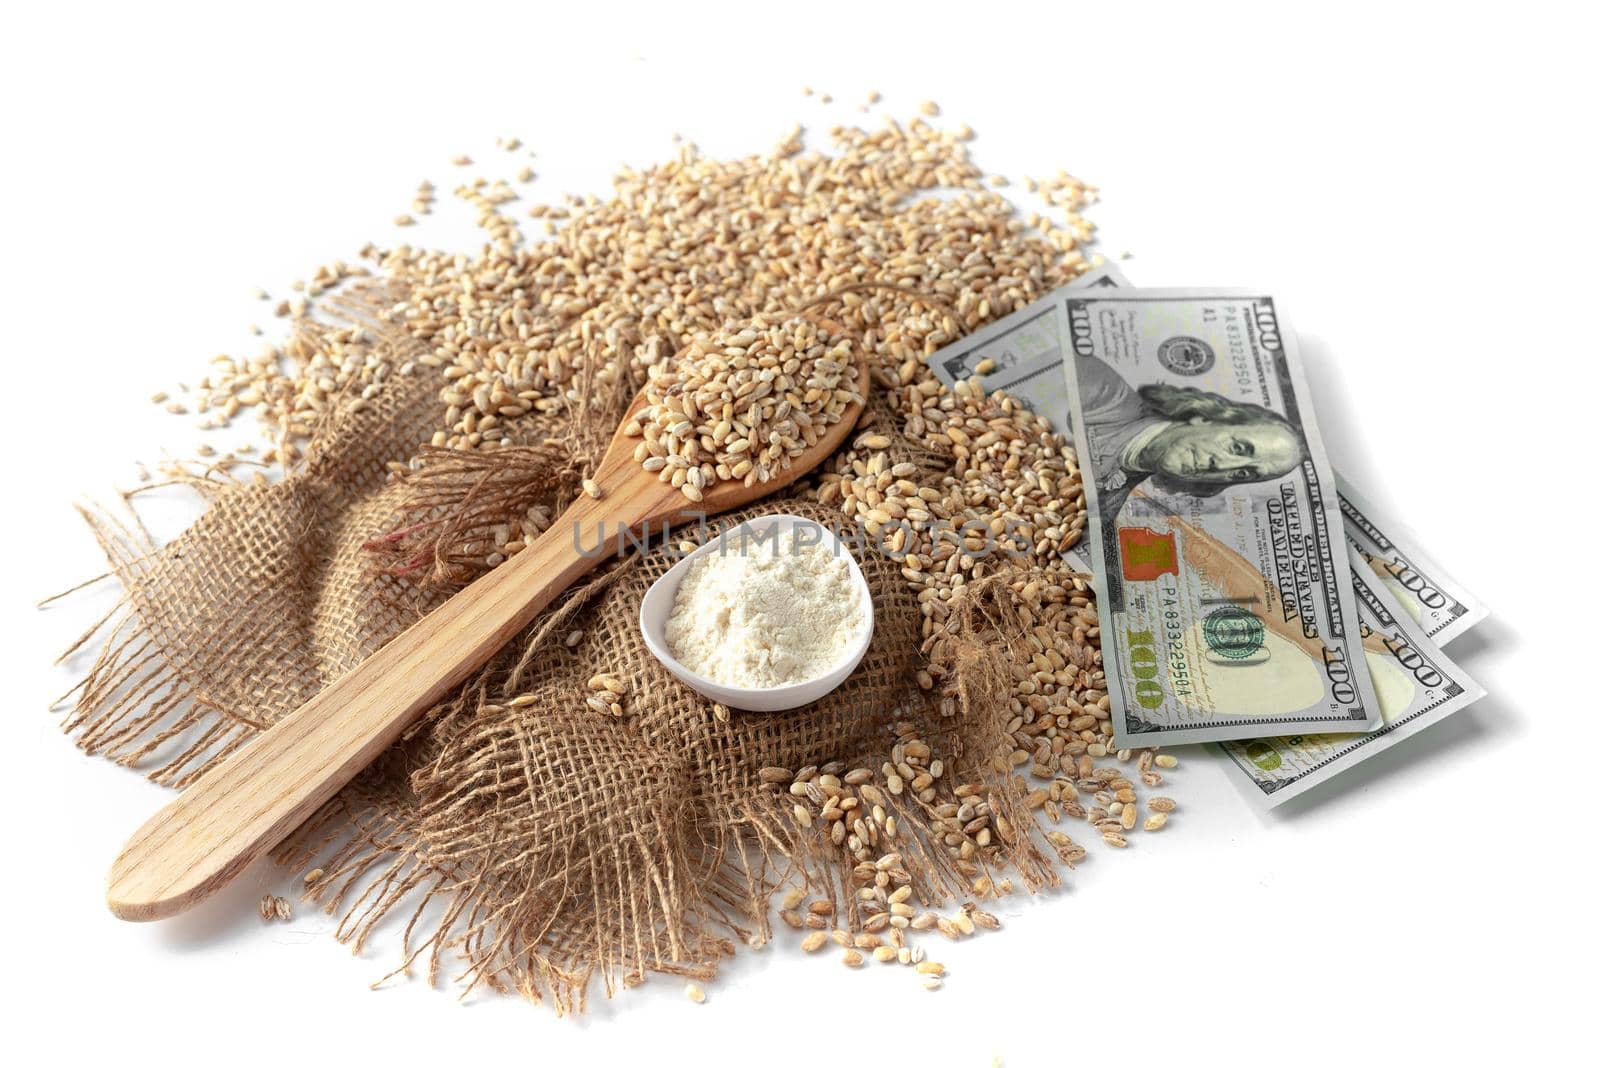 Grains of wheat or millet on a white background with money. The concept is a problem with food for grain caused by the war in Ukraine